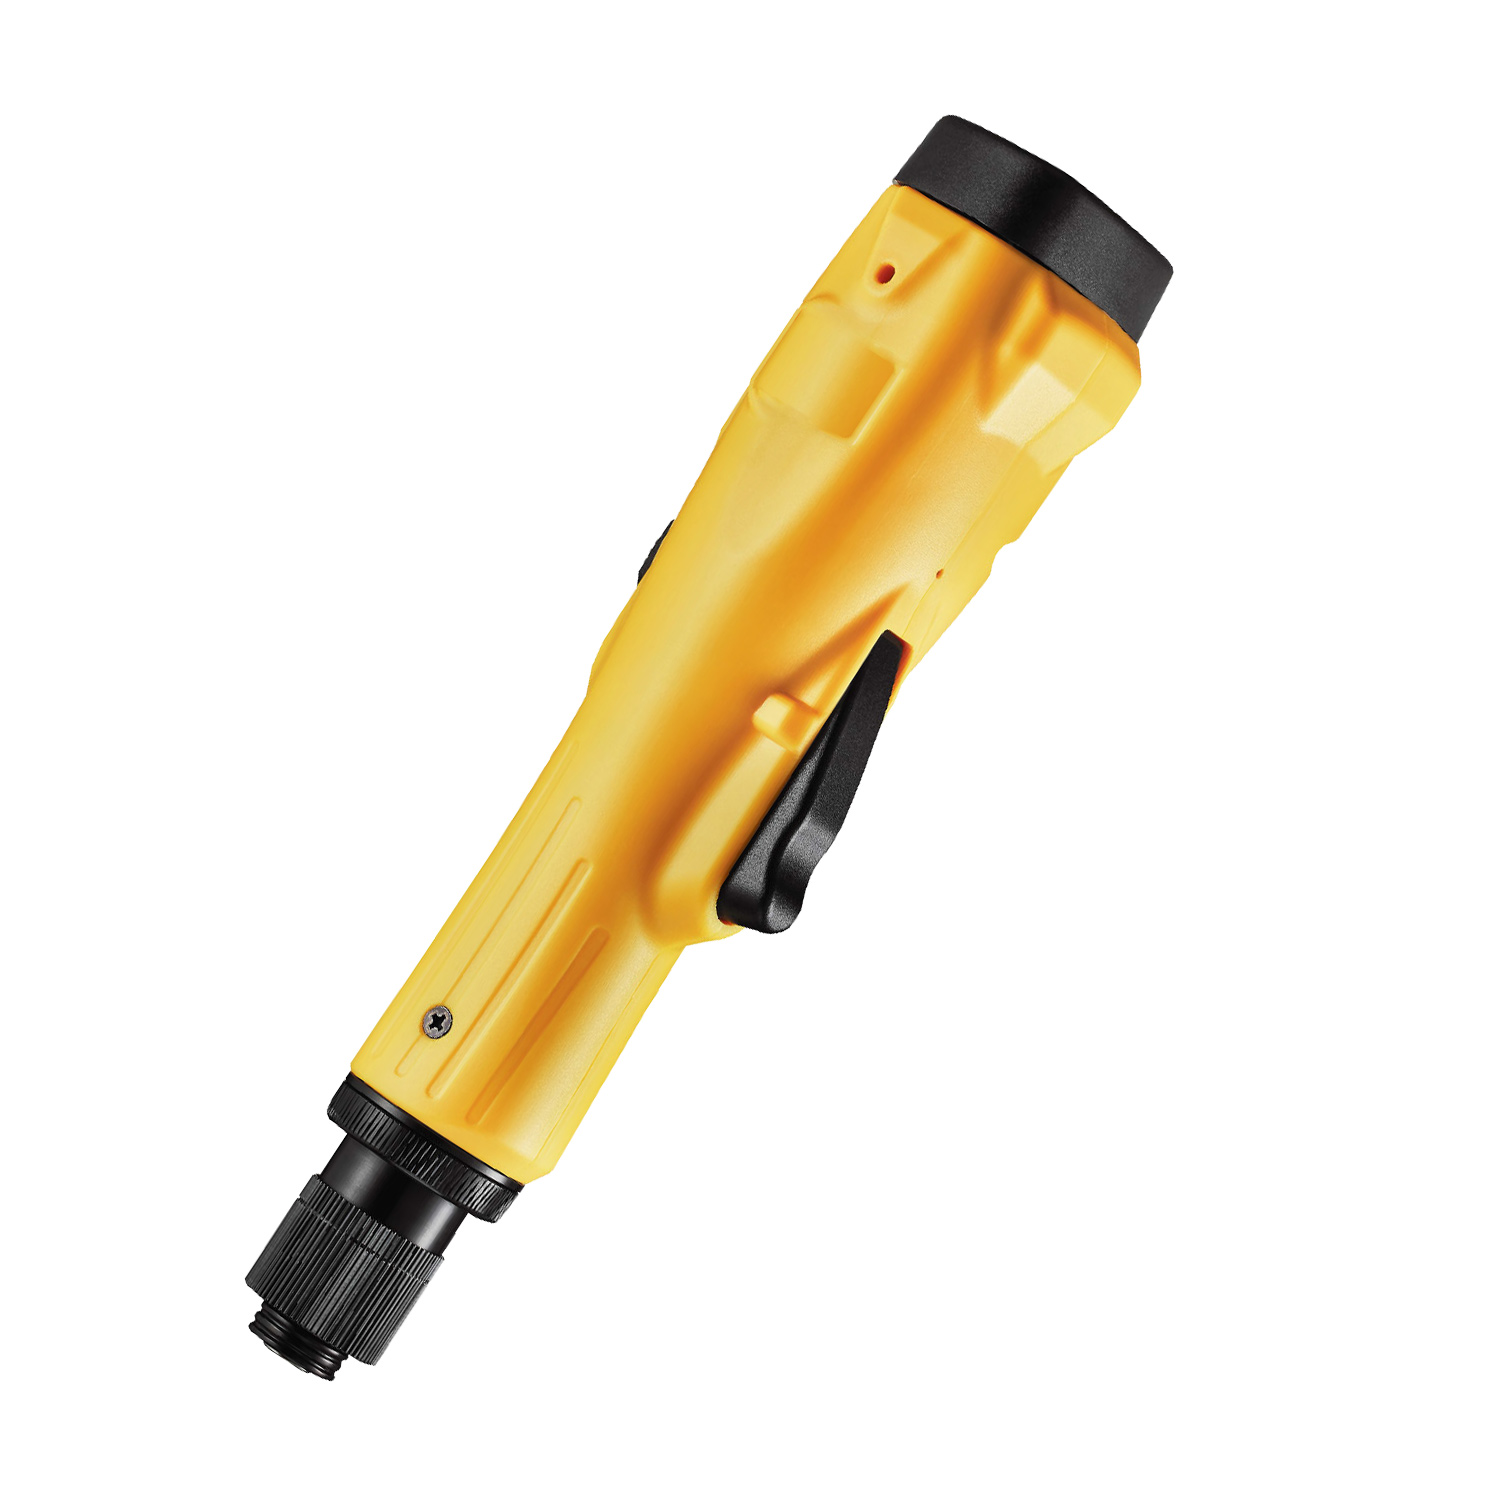 ESB823 Tool OnlyCordless Torque Screwdriver(0.2-1.2 Nm)(1.8-10.6 in.lbs)